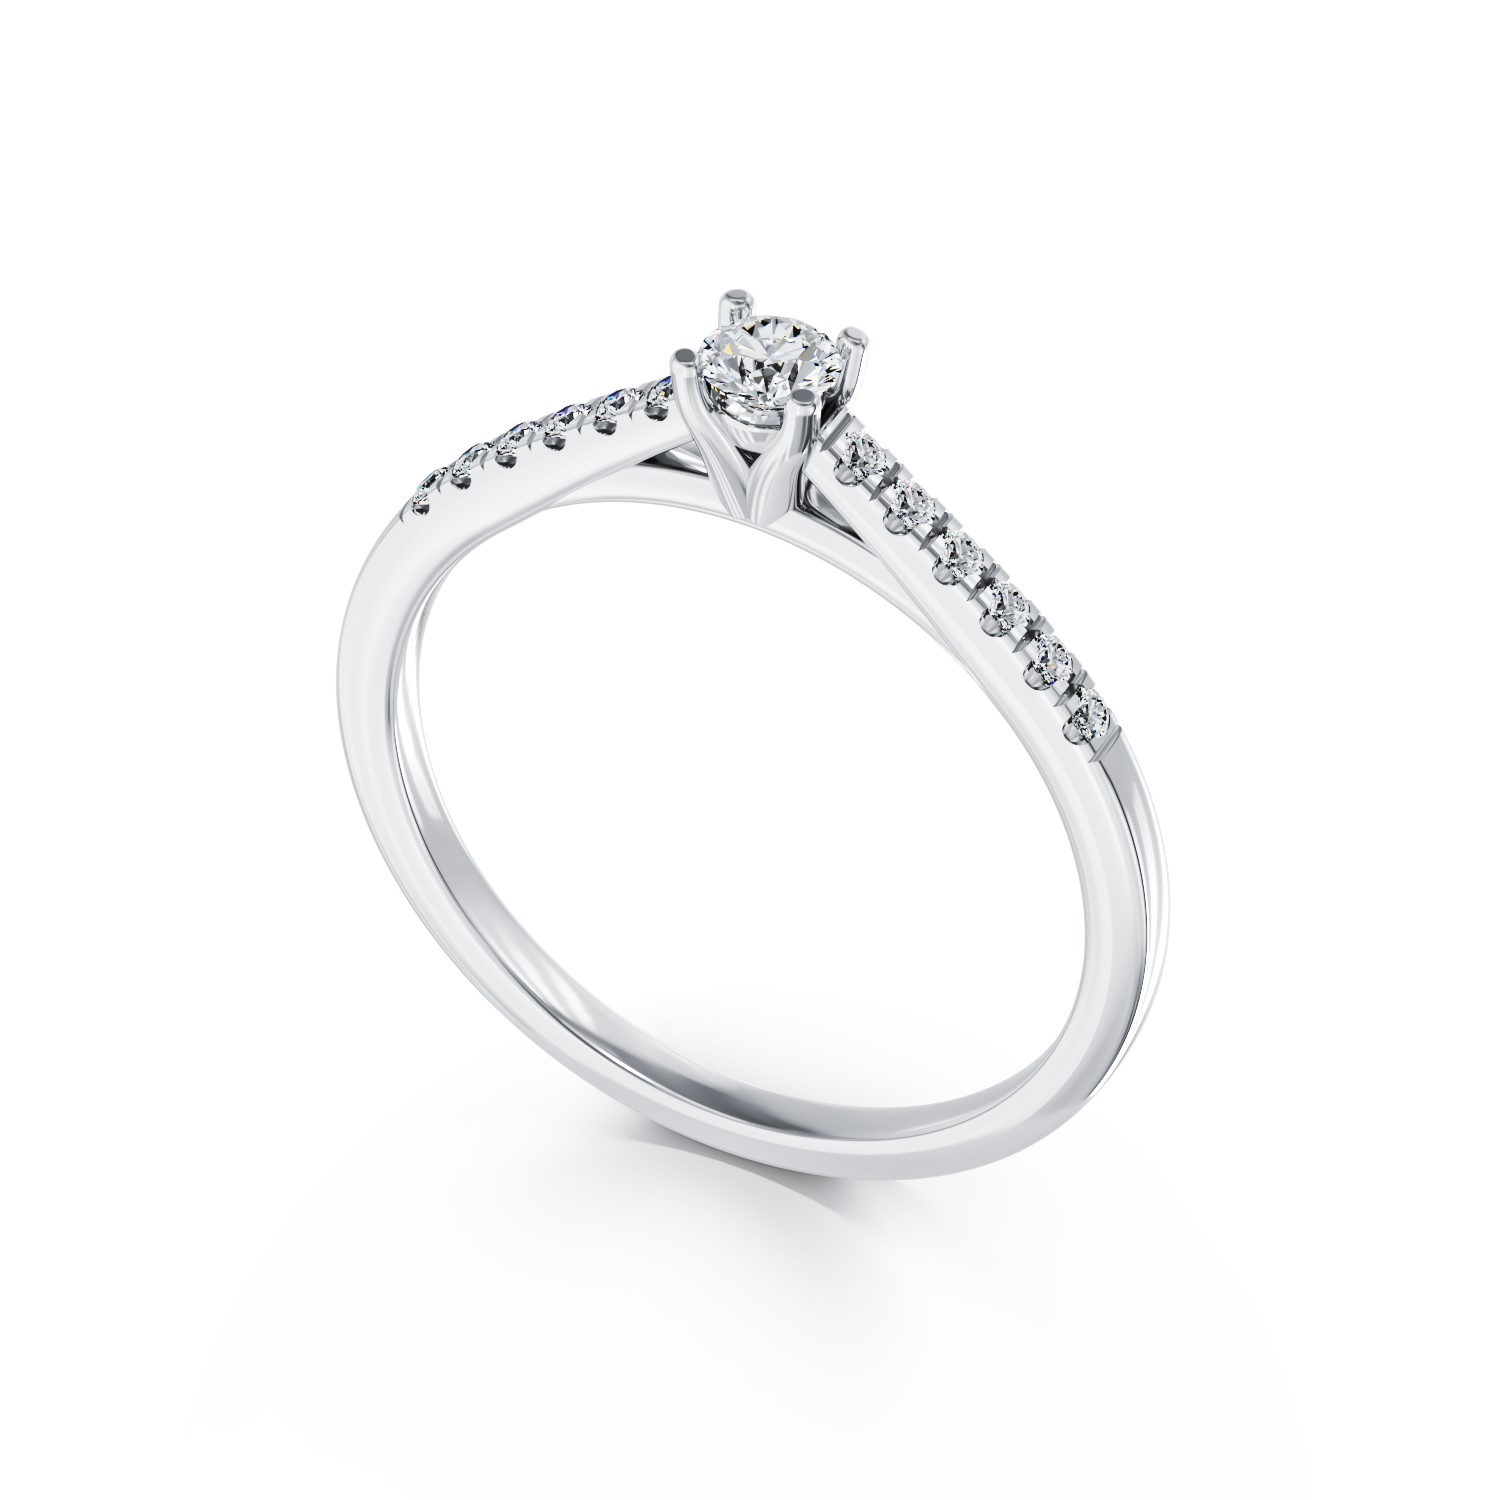 18K white gold engagement ring with 0.24ct diamond and 0.125ct diamonds